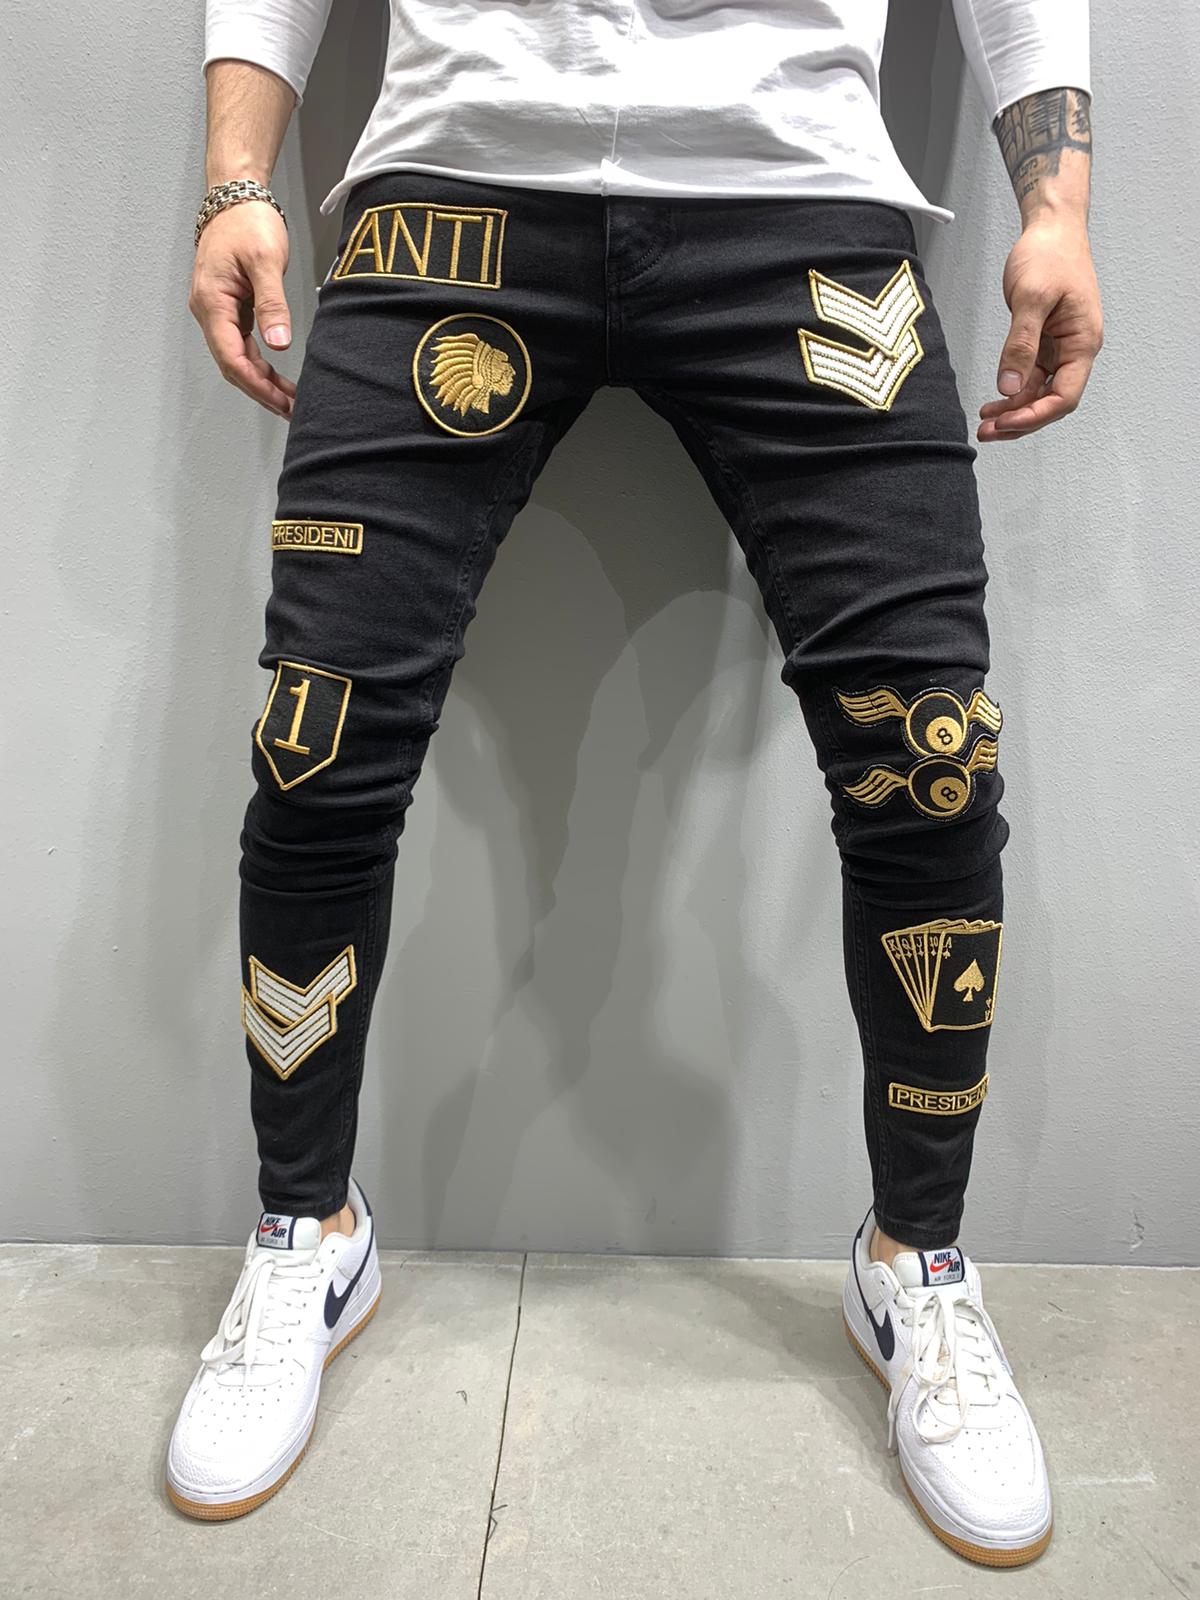 black patched skinny jeans